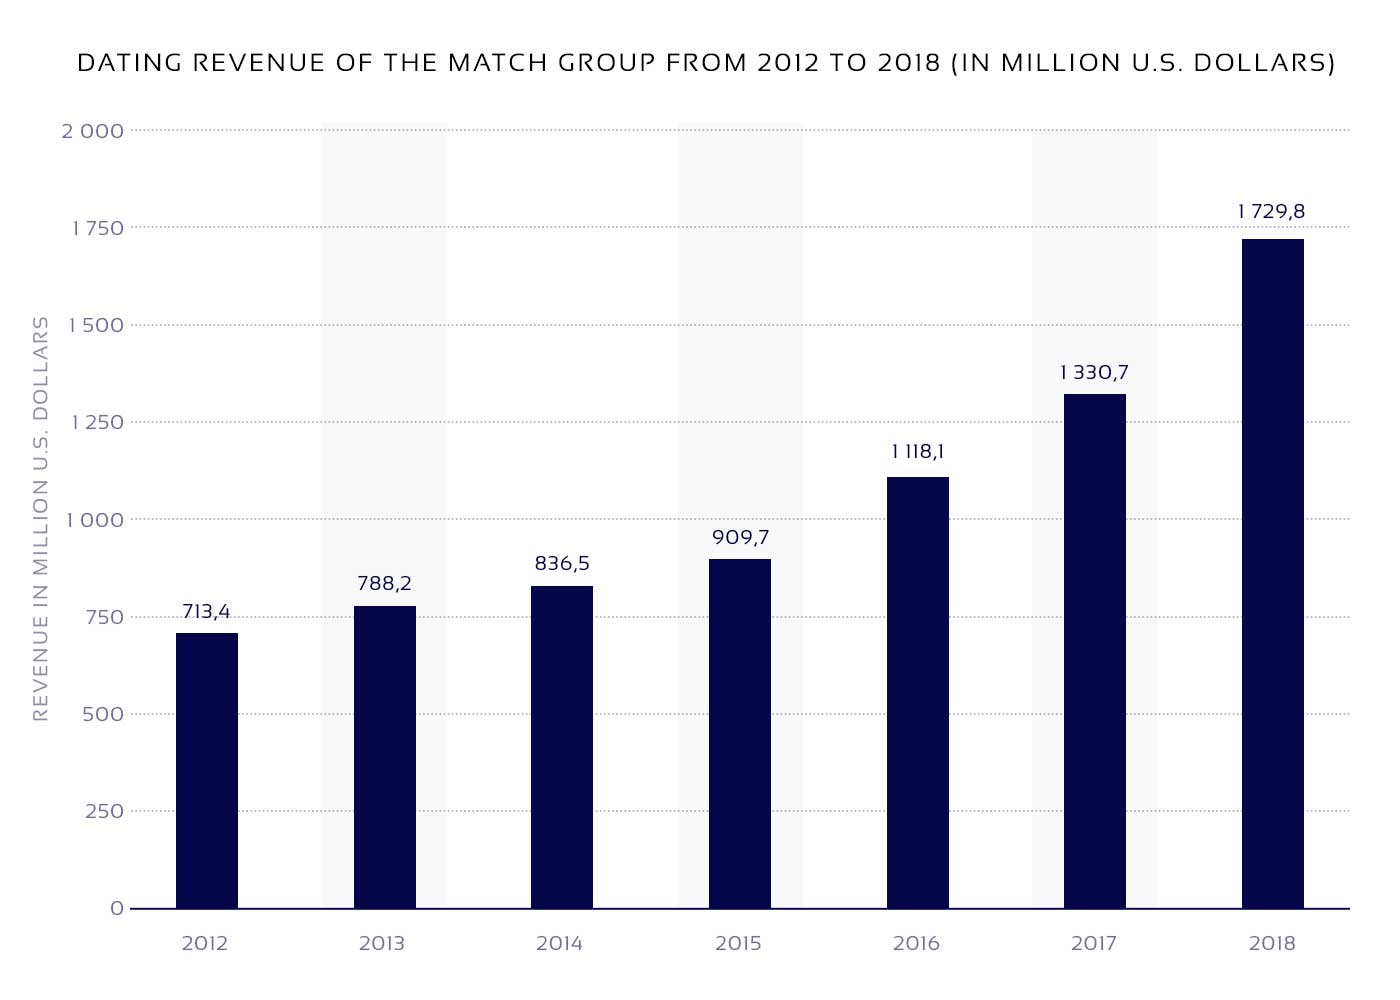 Match Group revenue in millions